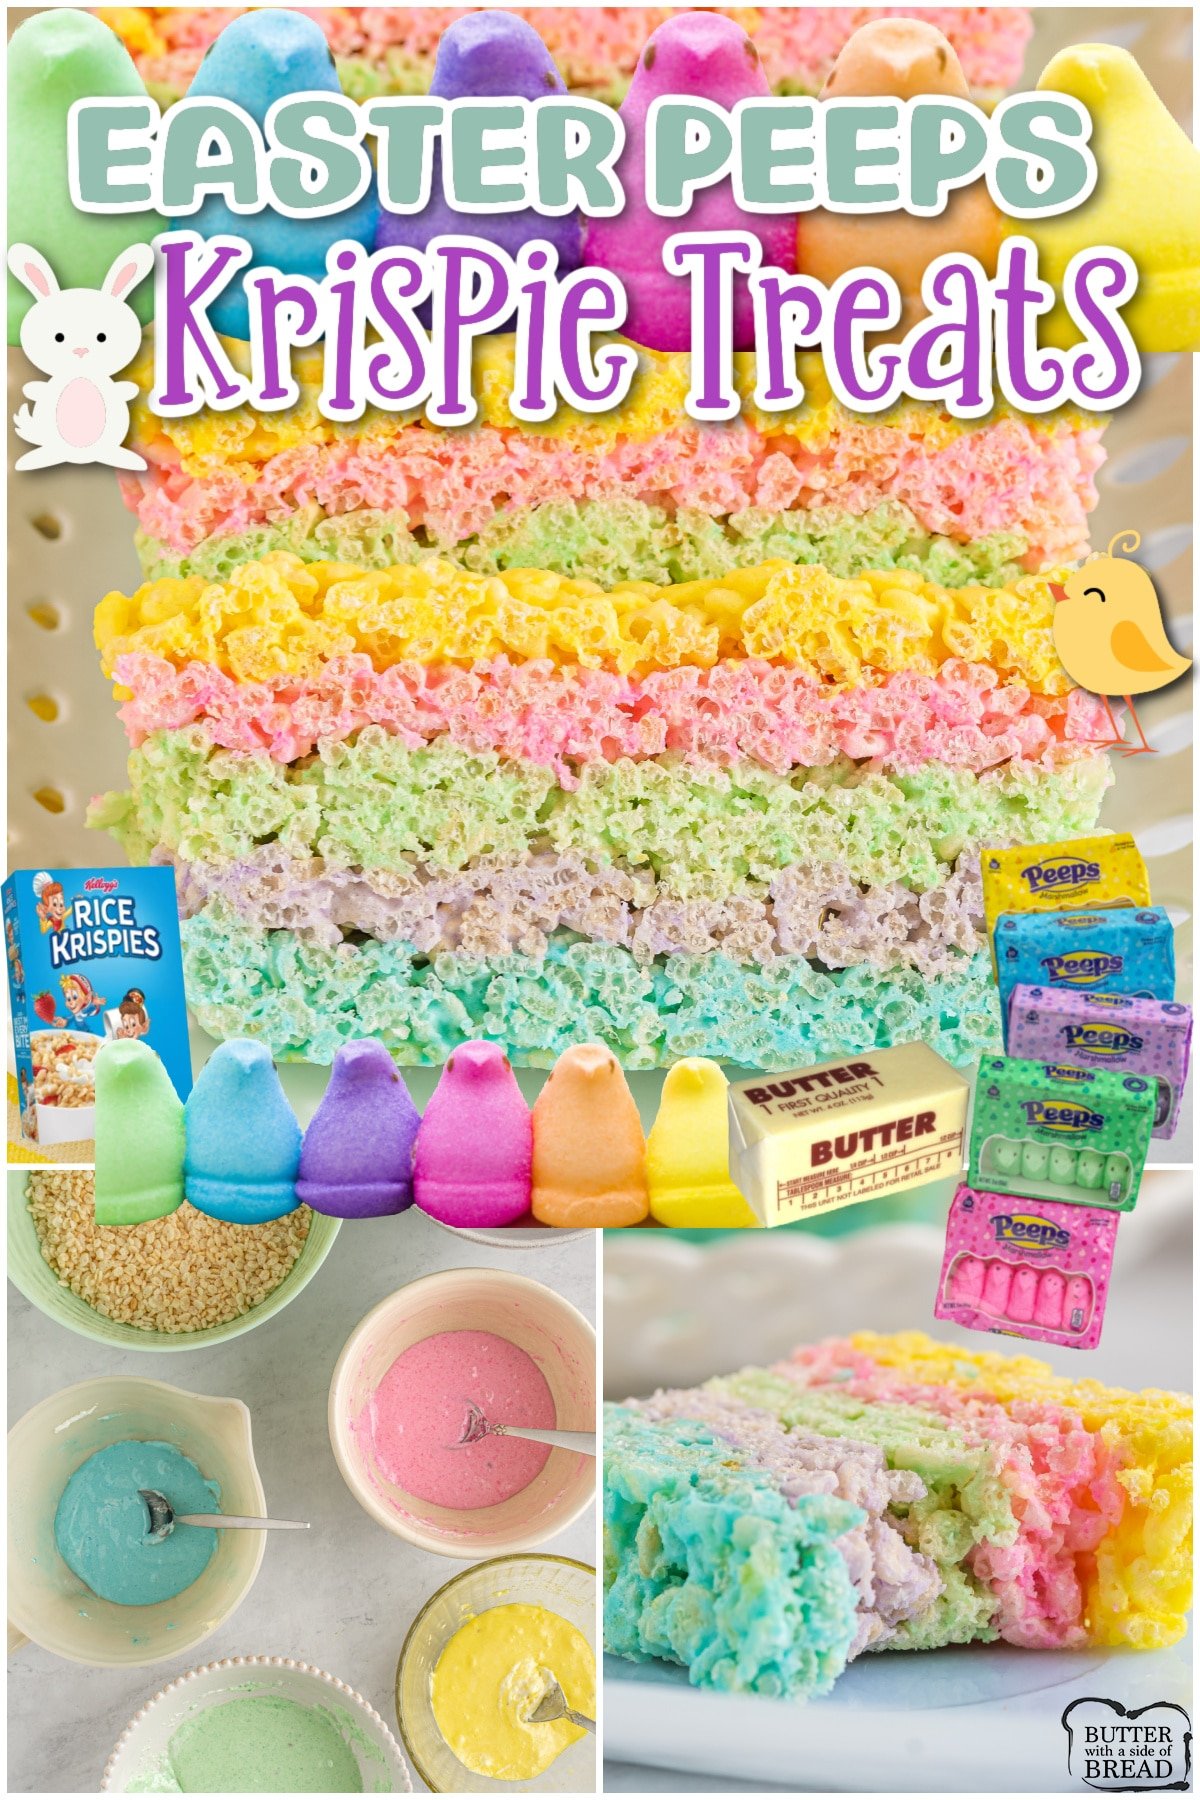 Easter Peeps Krispie Treats are a colorful & festive Easter dessert made with Peeps marshmallows! Classic rice krispie treats with a fun twist perfect for Easter. 